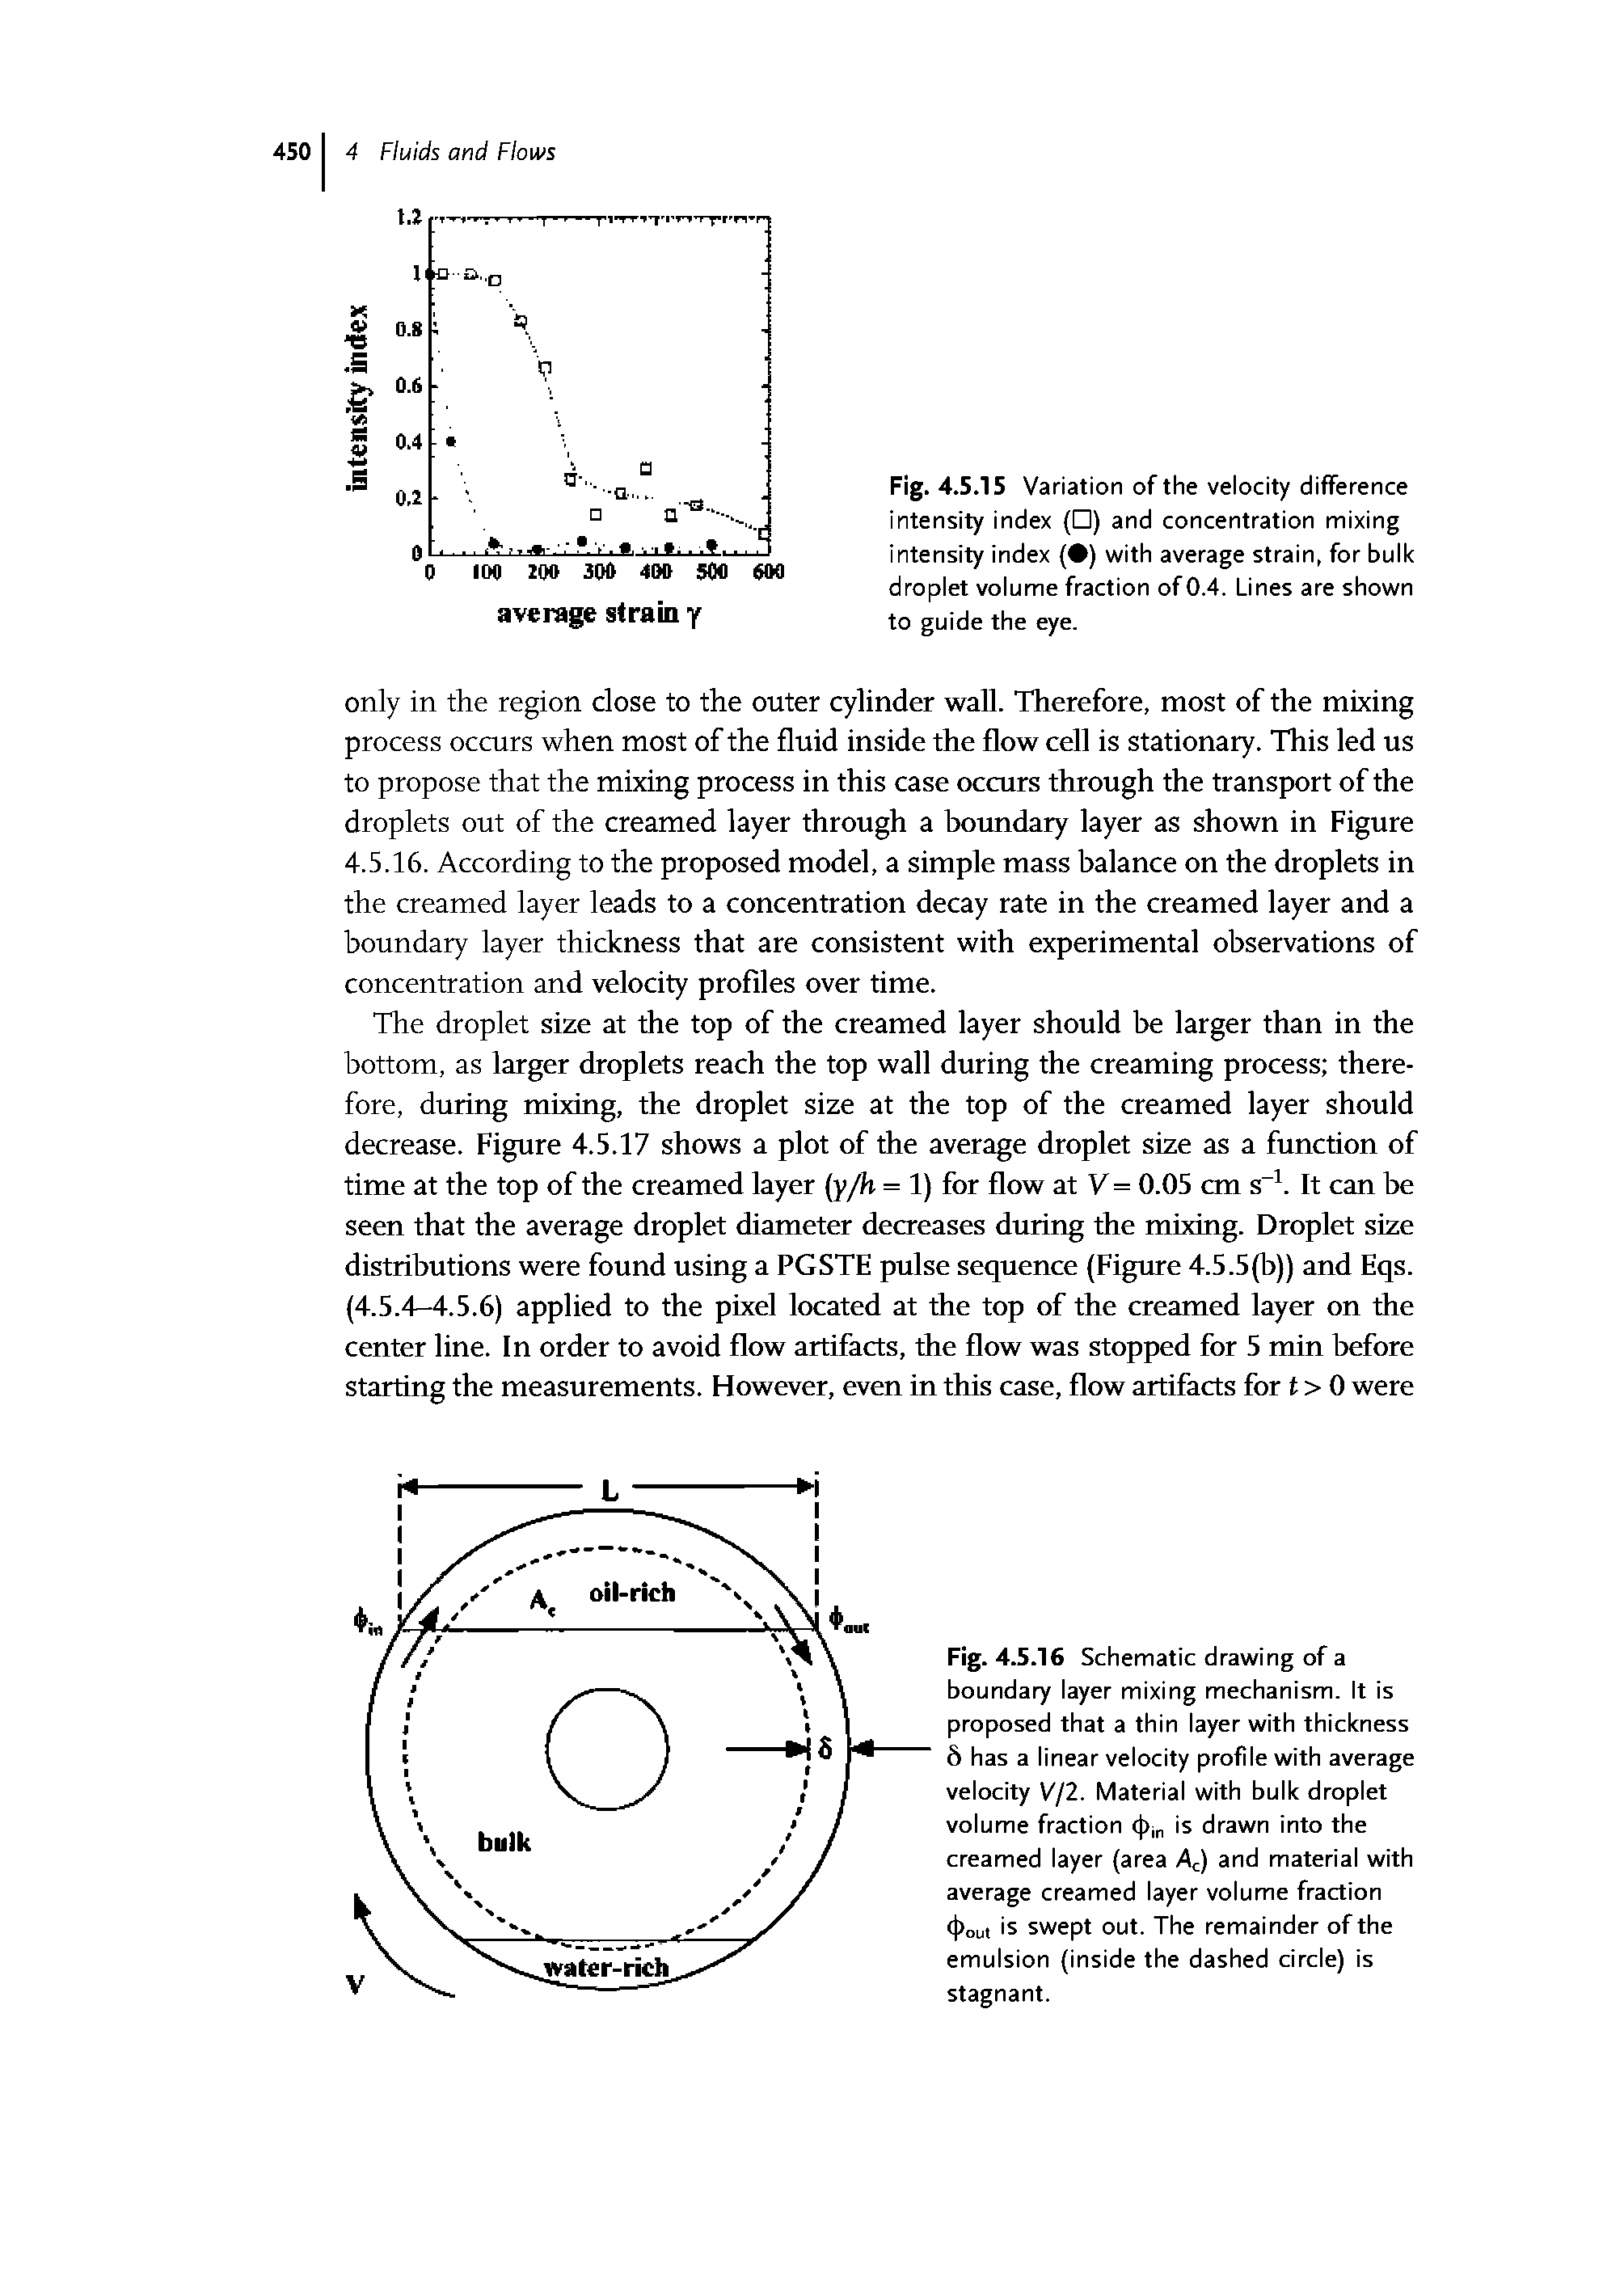 Fig. 4.5.16 Schematic drawing of a boundary layer mixing mechanism. It is proposed that a thin layer with thickness 8 has a linear velocity profile with average velocity V/2. Material with bulk droplet volume fraction ( >in is drawn into the creamed layer (area Ac) and material with average creamed layer volume fraction (j)ou, is swept out. The remainder of the emulsion (inside the dashed circle) is stagnant.